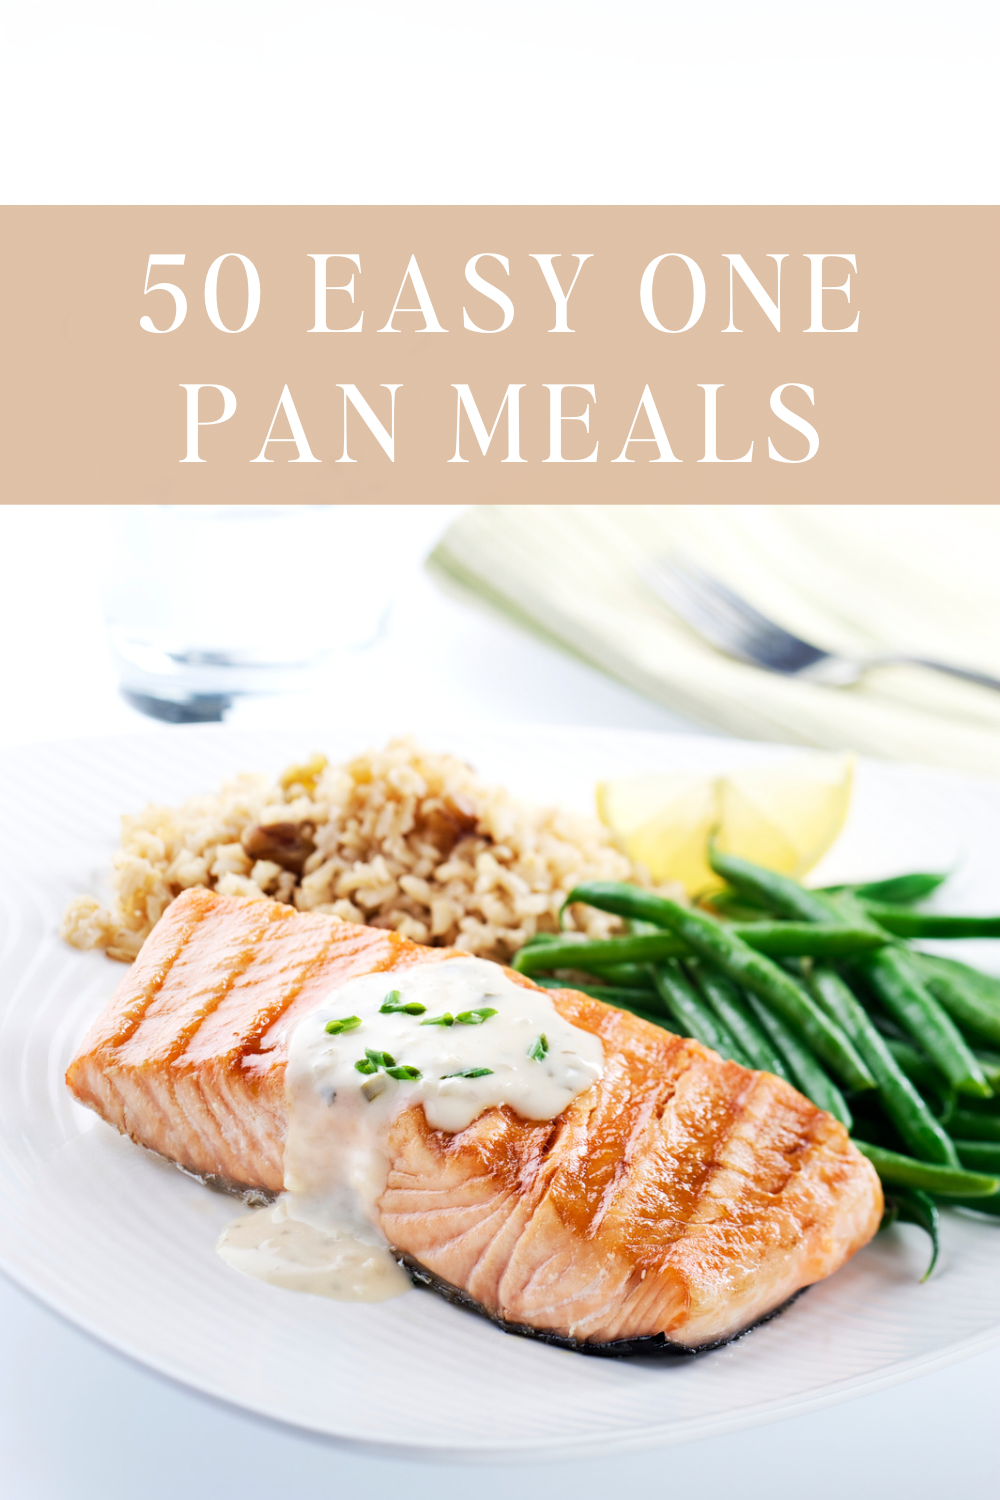 One Pan Meals